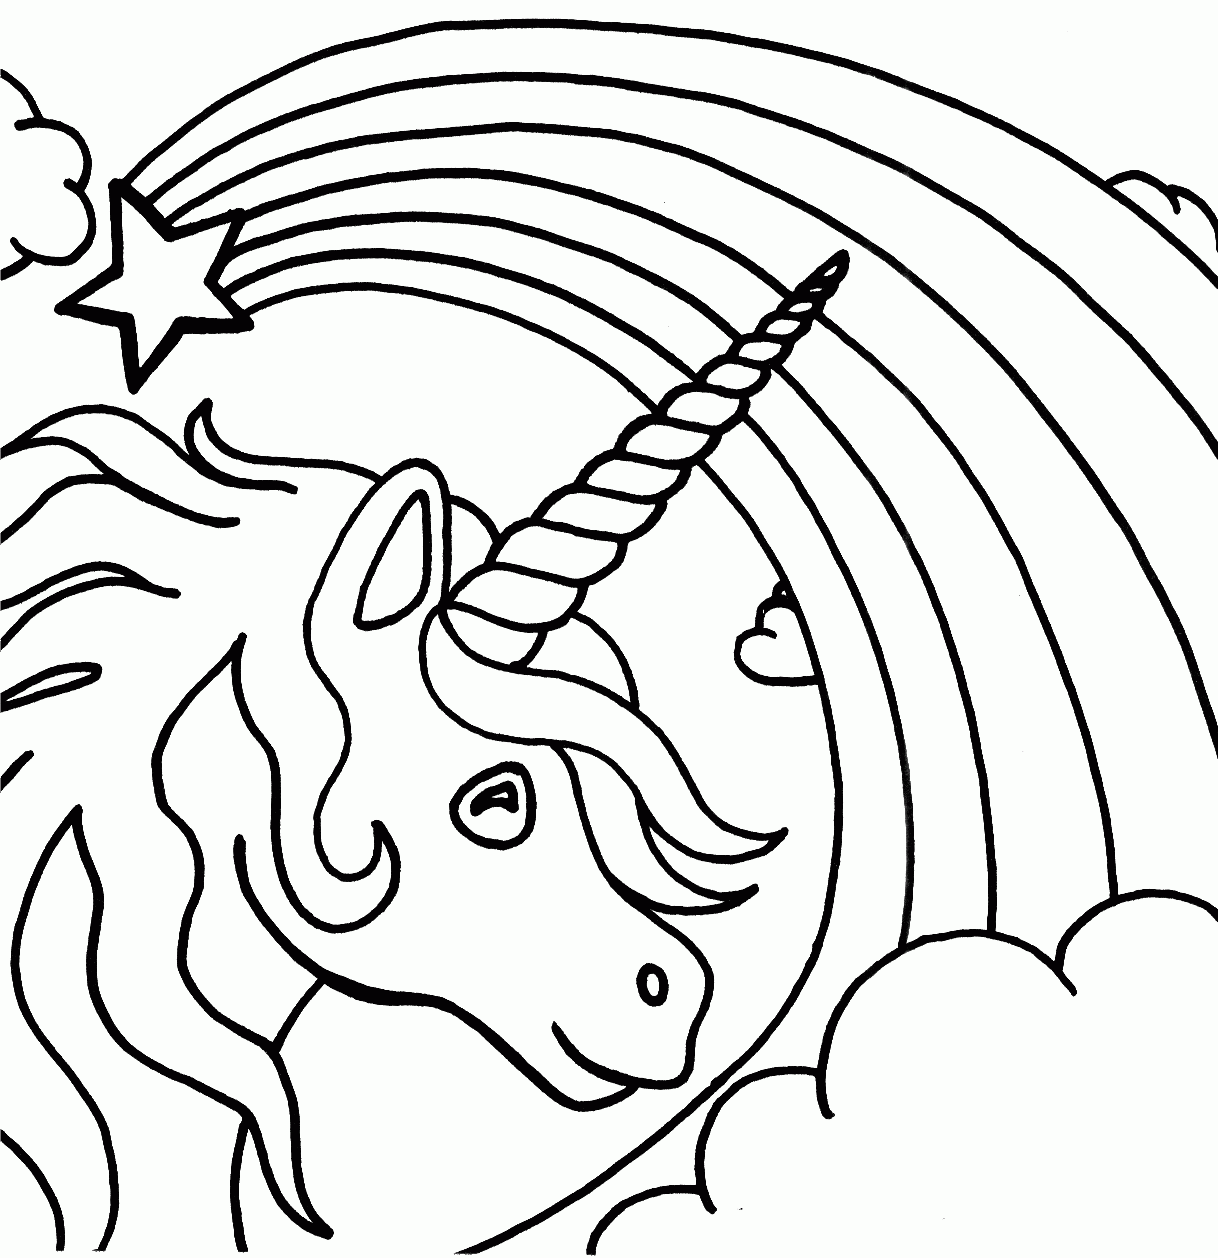 Related Pegasus Coloring Pages item-12315, Pegasus Coloring Pages ...